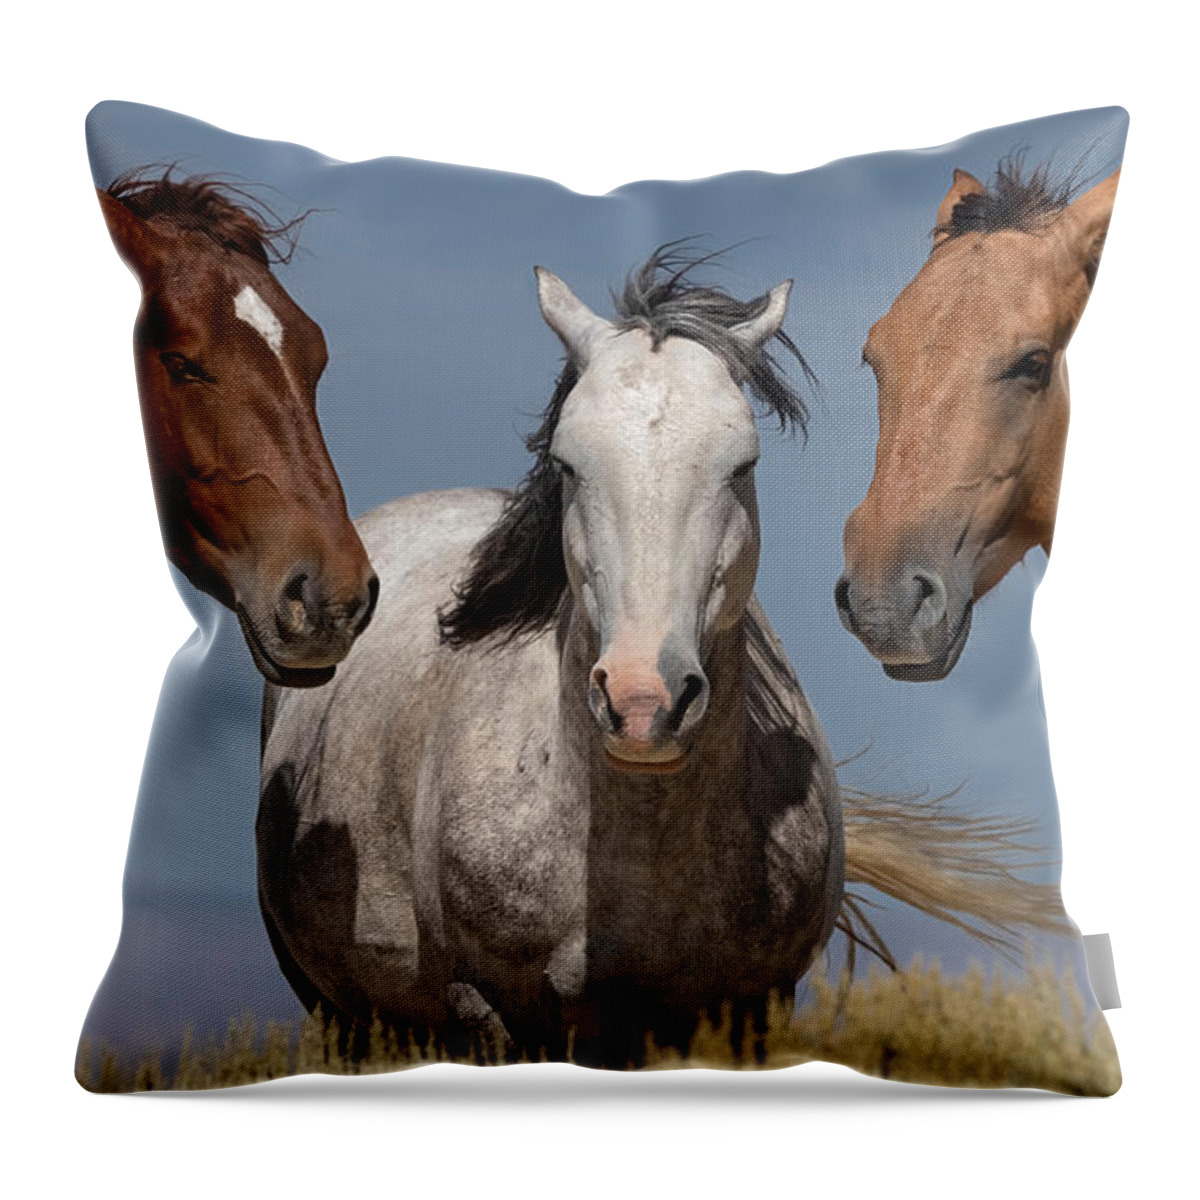 Stallion Throw Pillow featuring the photograph The Bachelors Three Color by Paul Martin